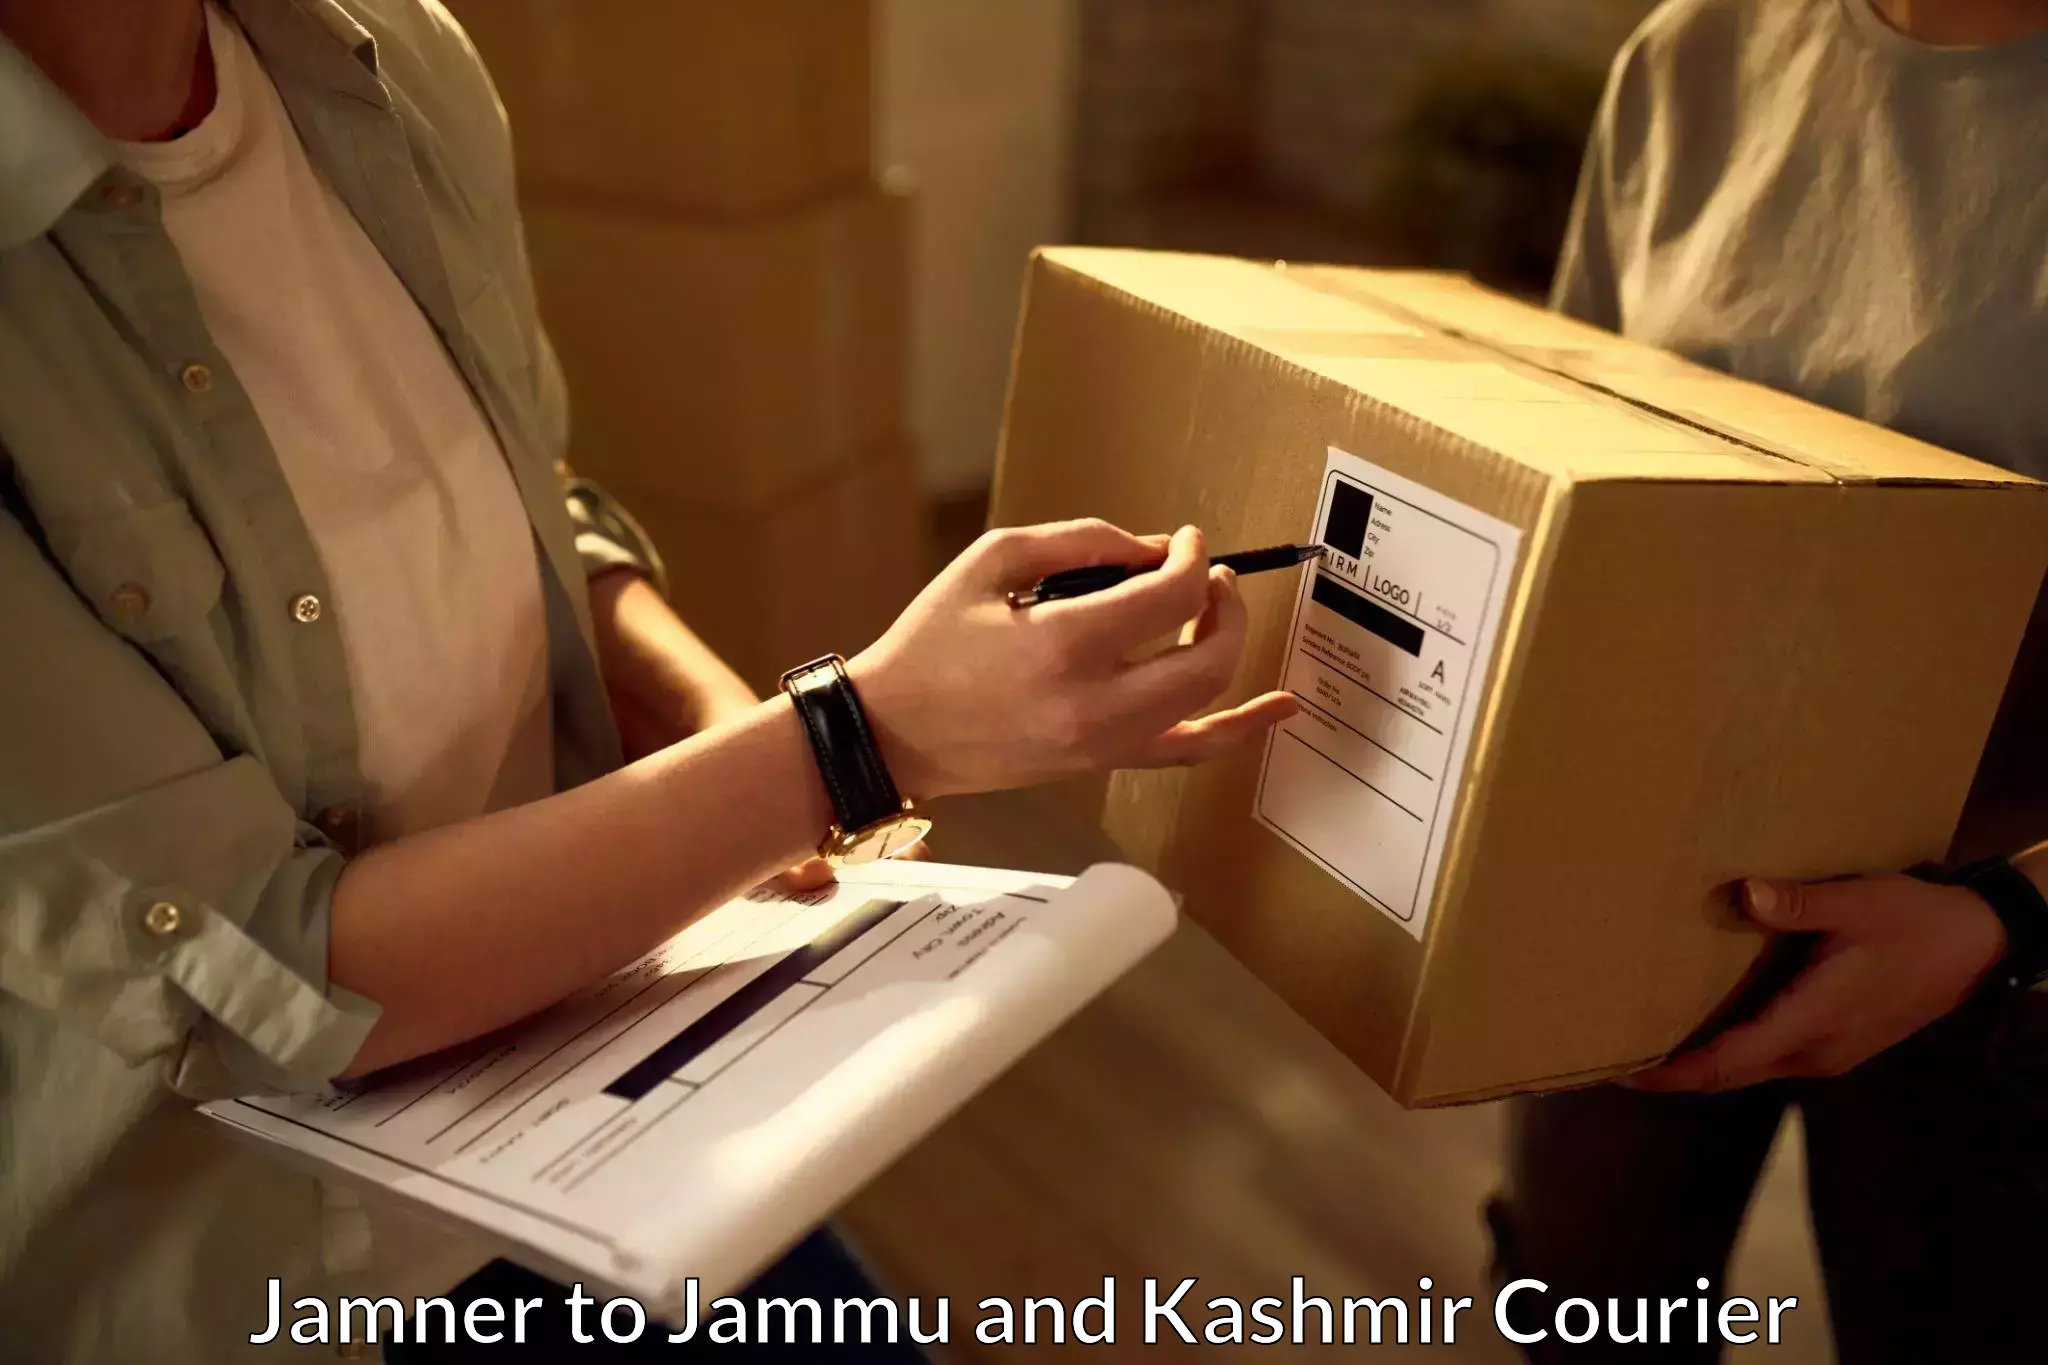 Comprehensive shipping network in Jamner to Baramulla